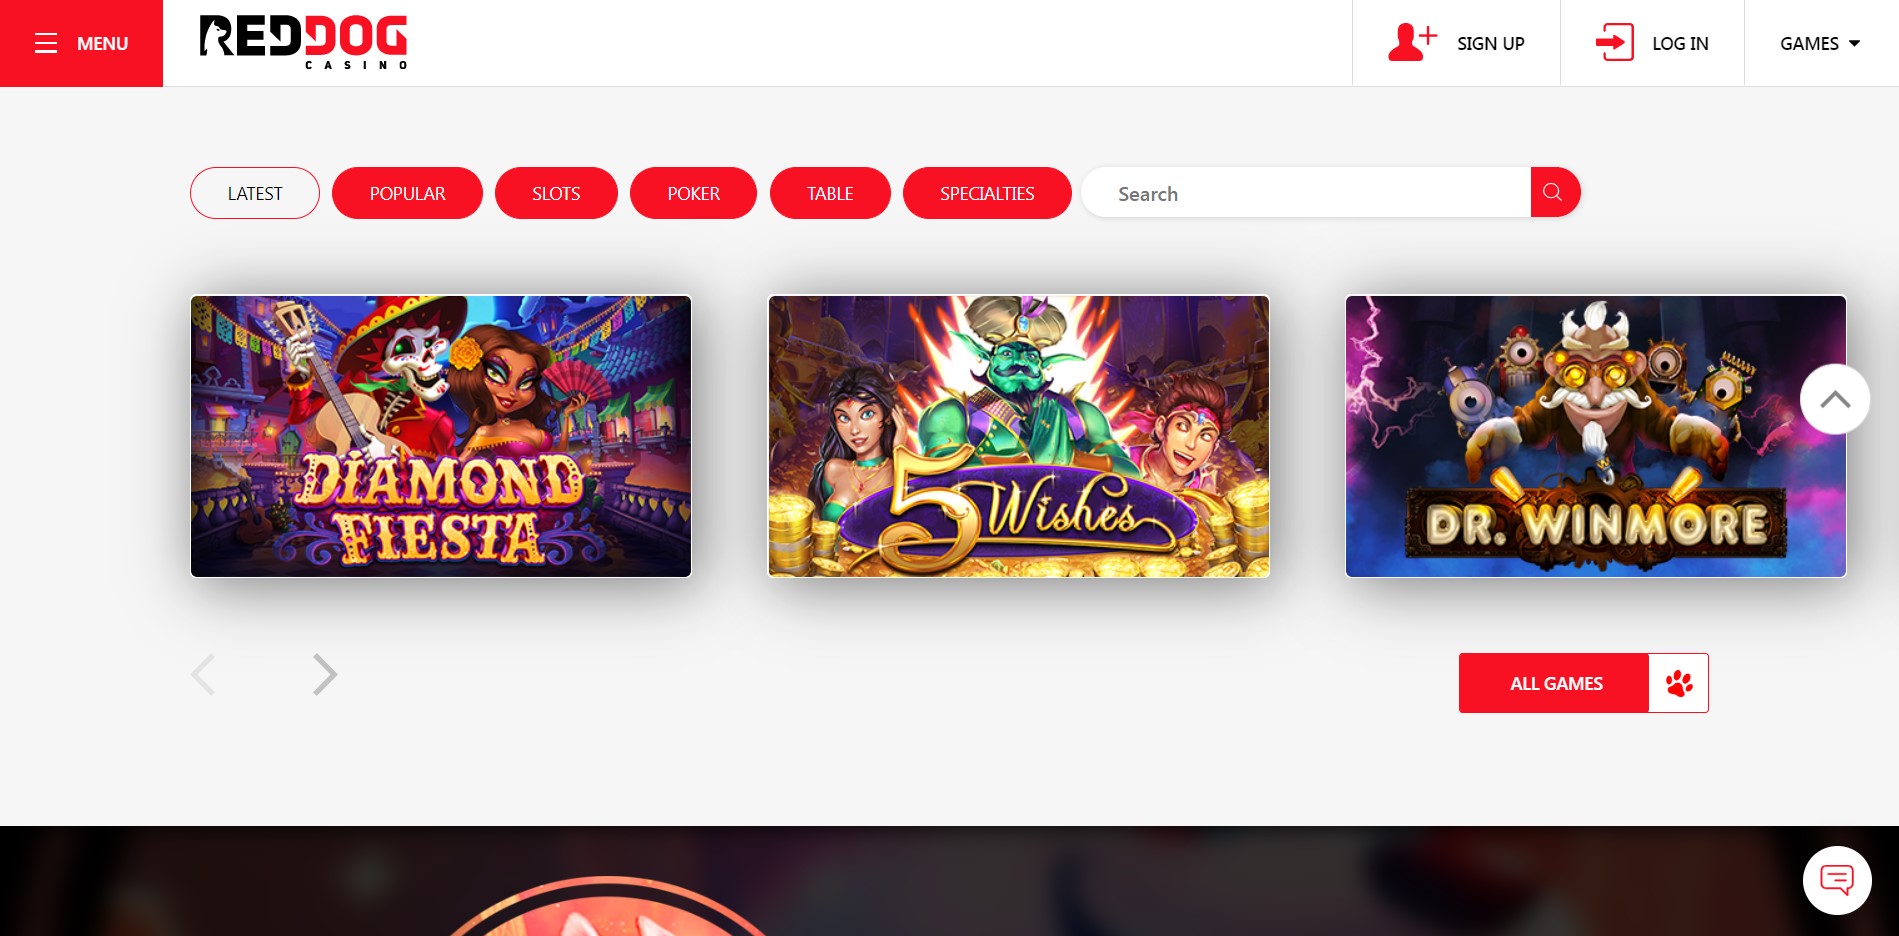 Red Dog Casino Latest Games